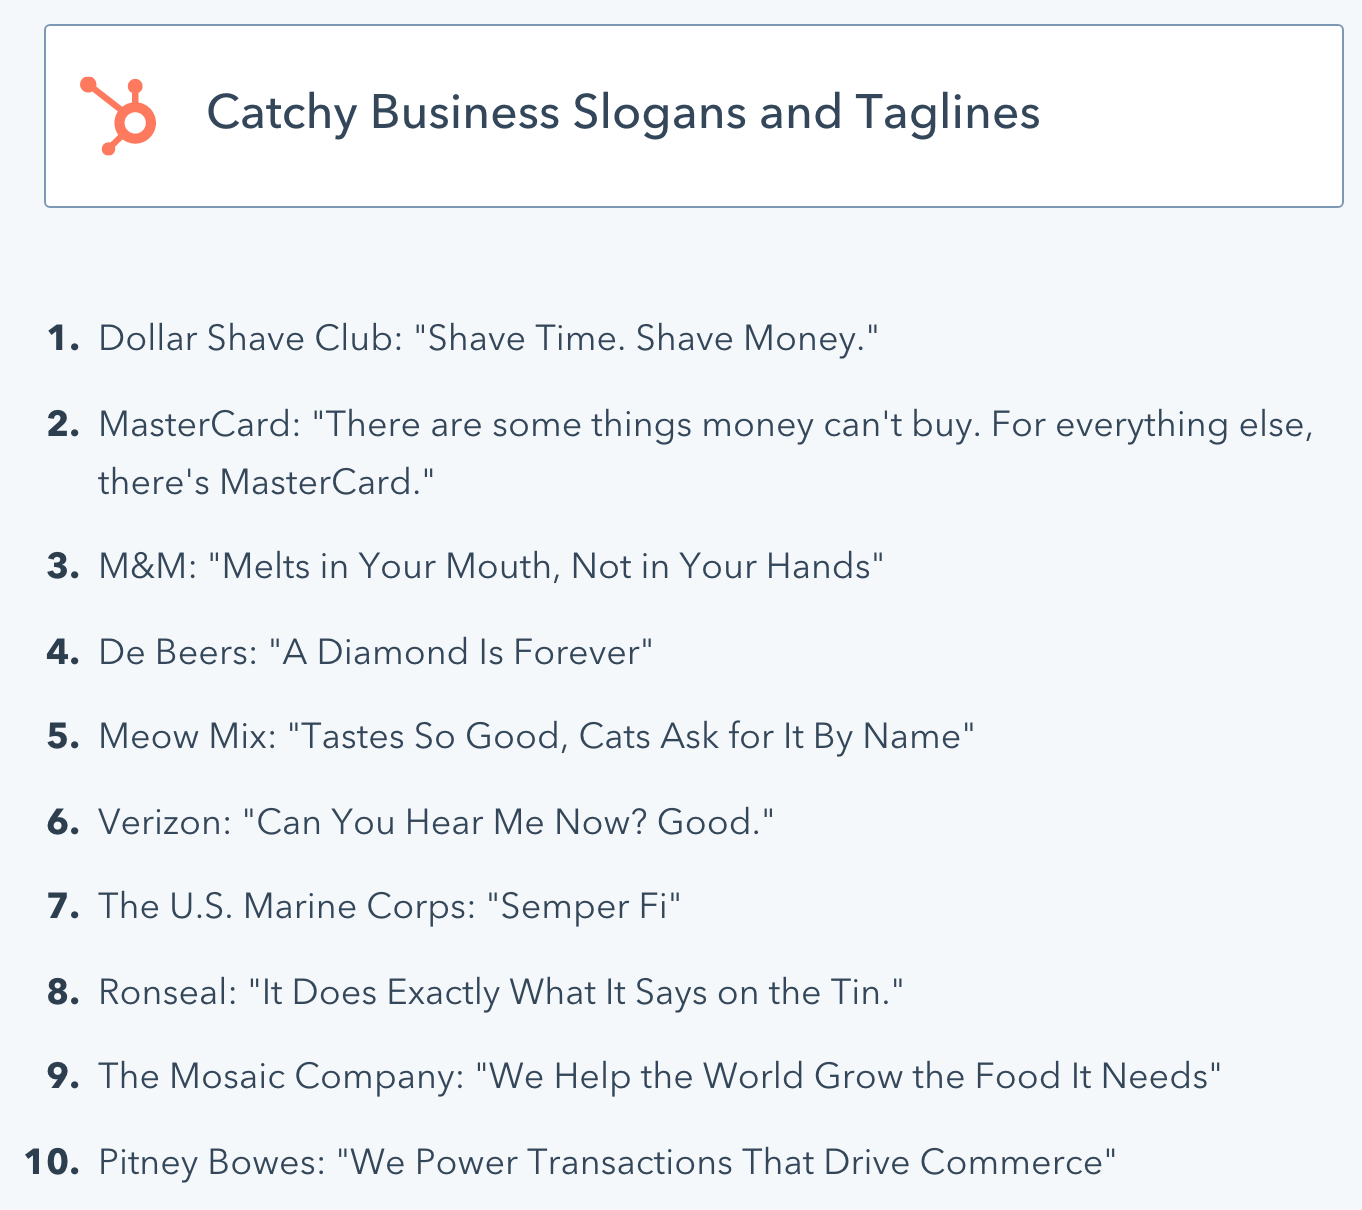 Screenshot showing catchy business slogans and taglines